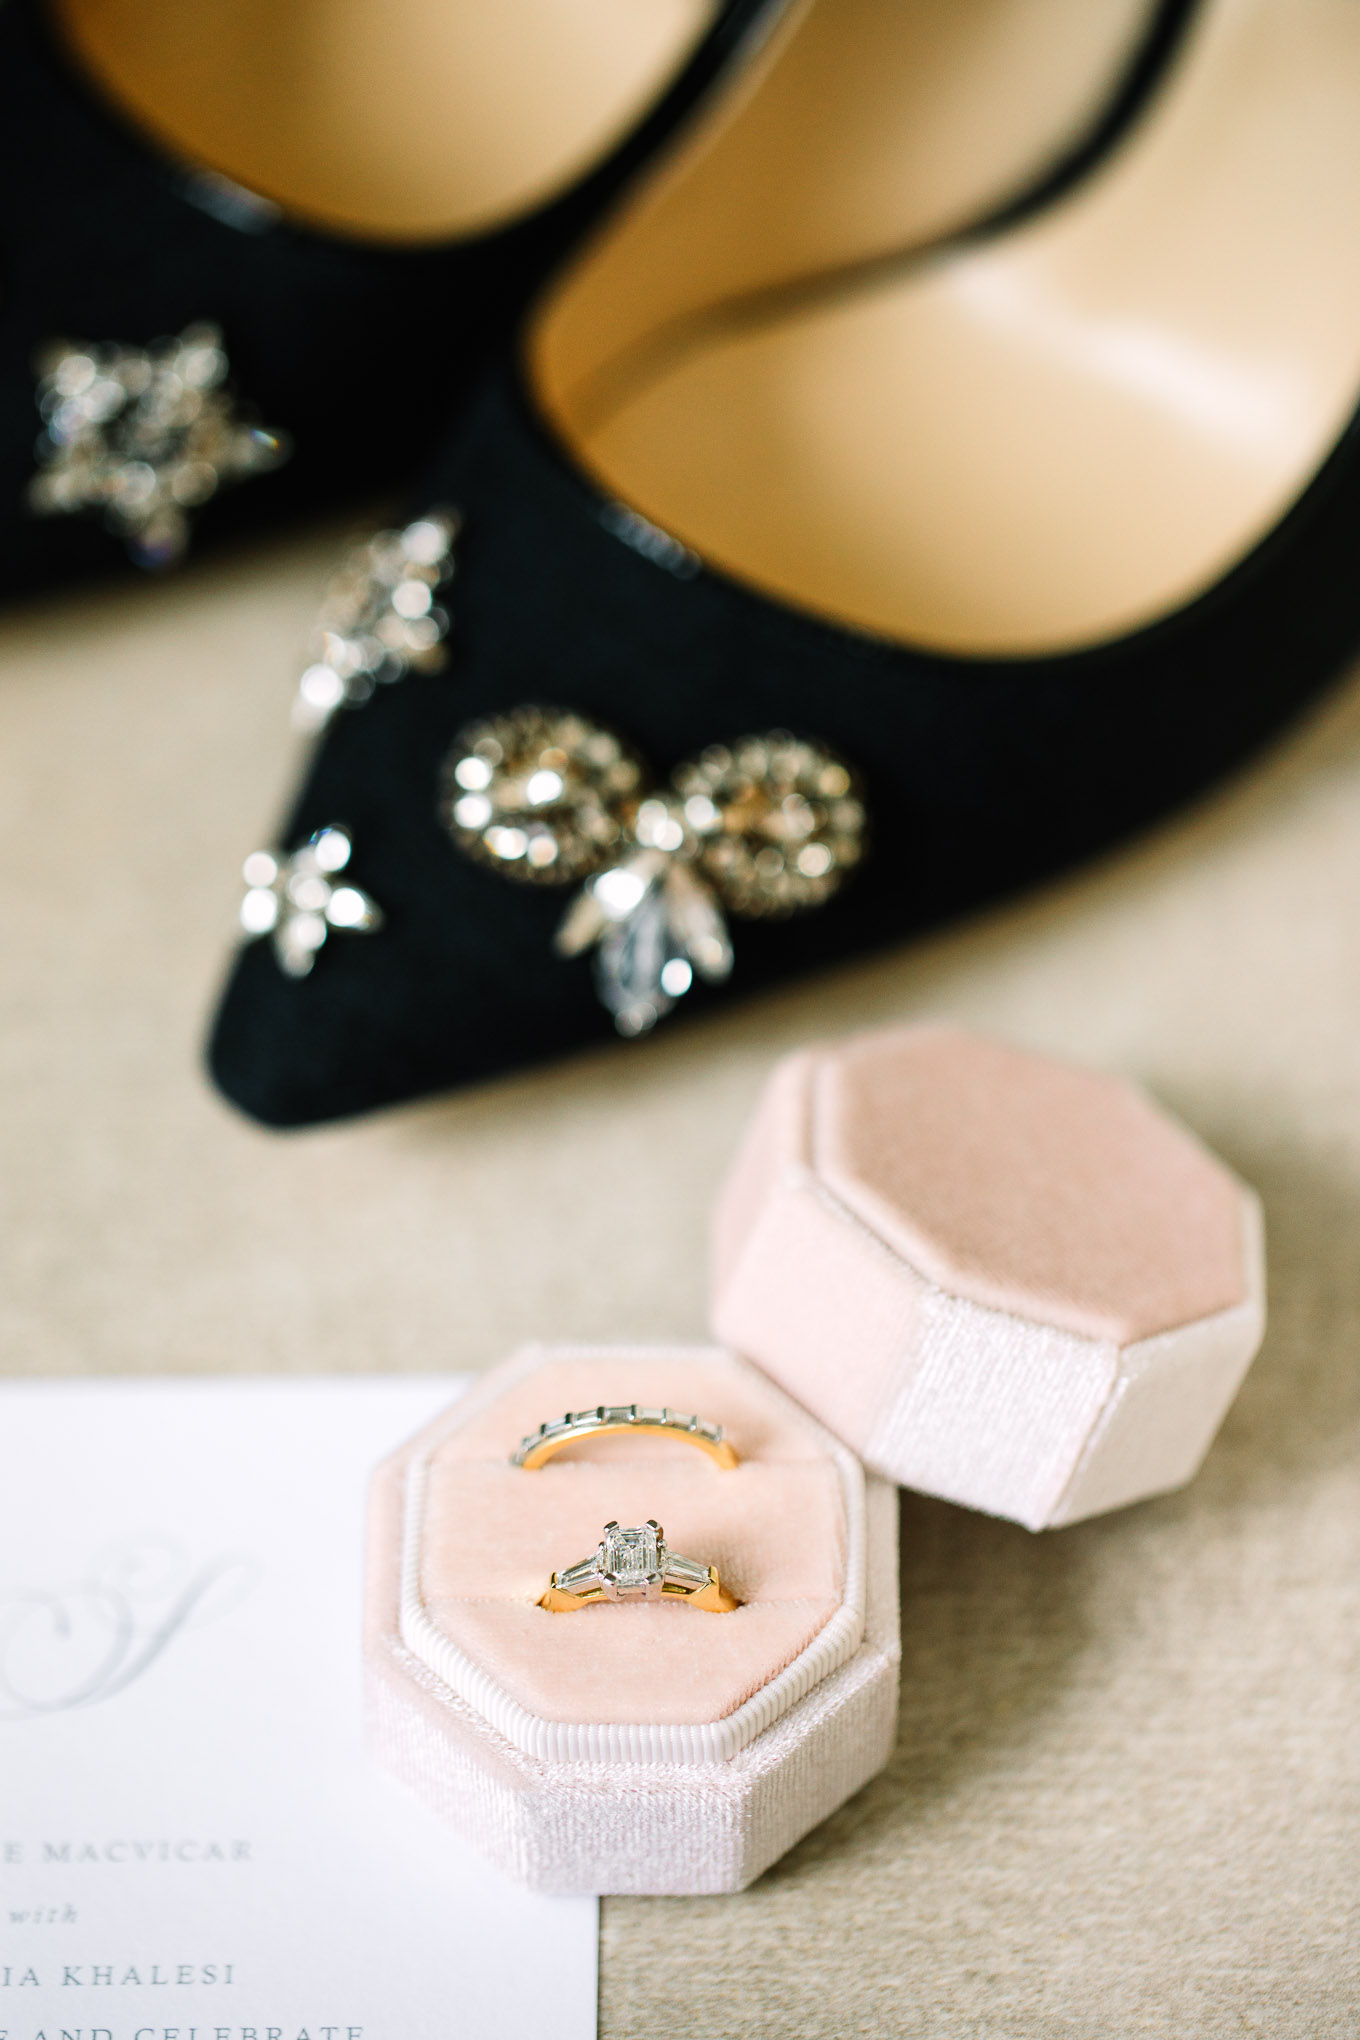 Wedding rings in pink velvet ring box with Jimmy Choo navy embellished pumps. Millbrook Resort Queenstown New Zealand wedding by Mary Costa Photography | www.marycostaweddings.com